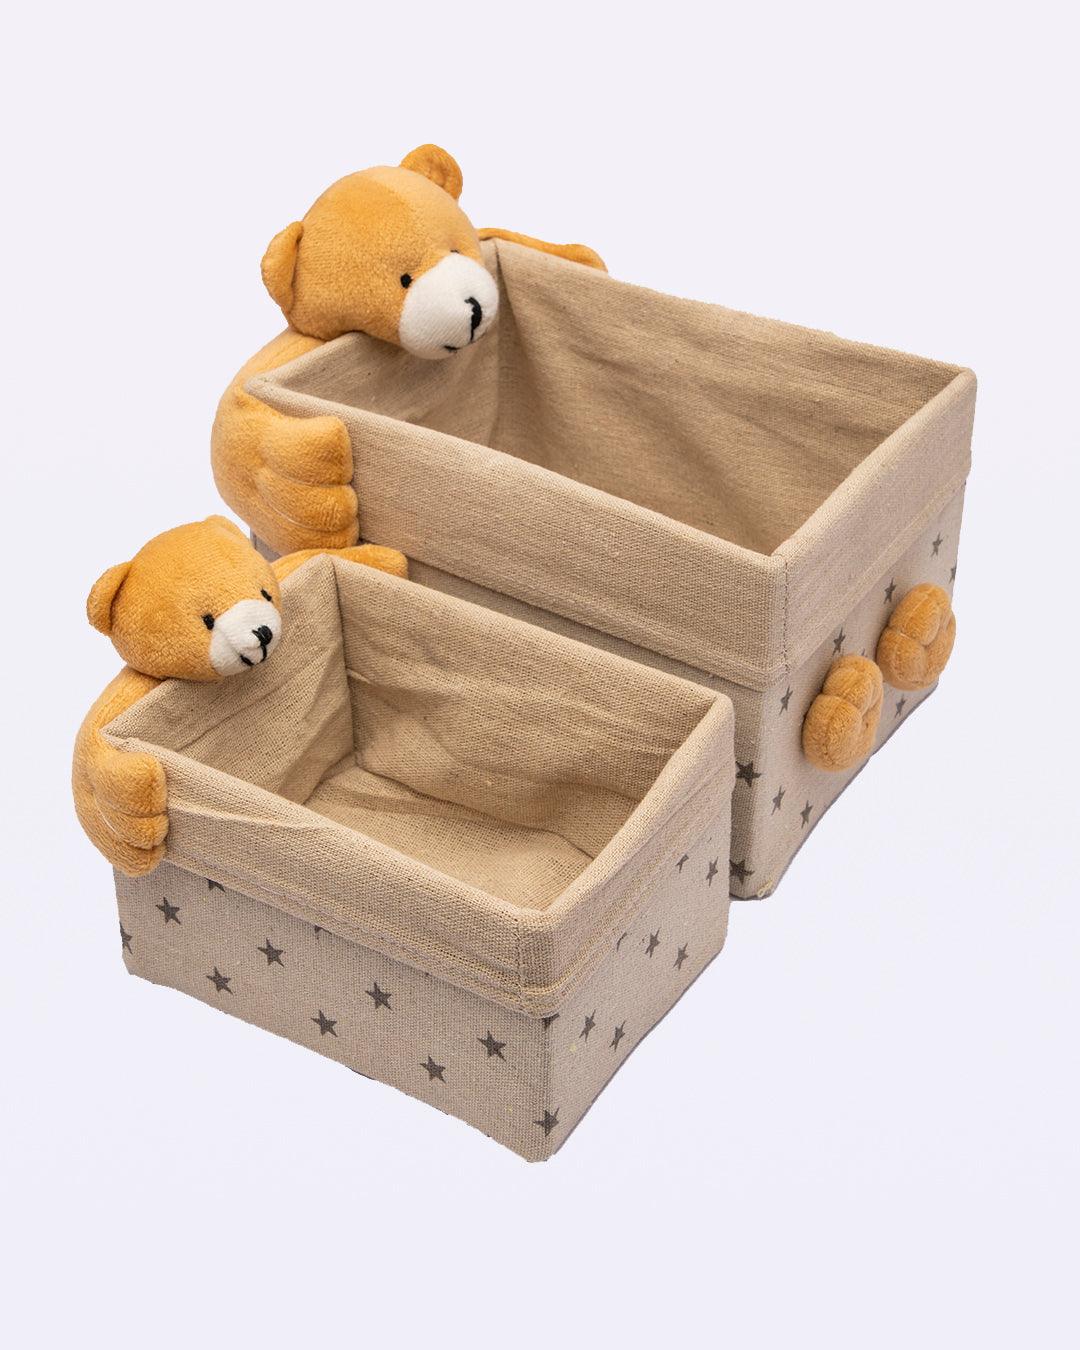 Fabric Toy Basket, for Home Storage, Teddy Bear, Brown, Paper & Fabric, Set of 2 - MARKET 99